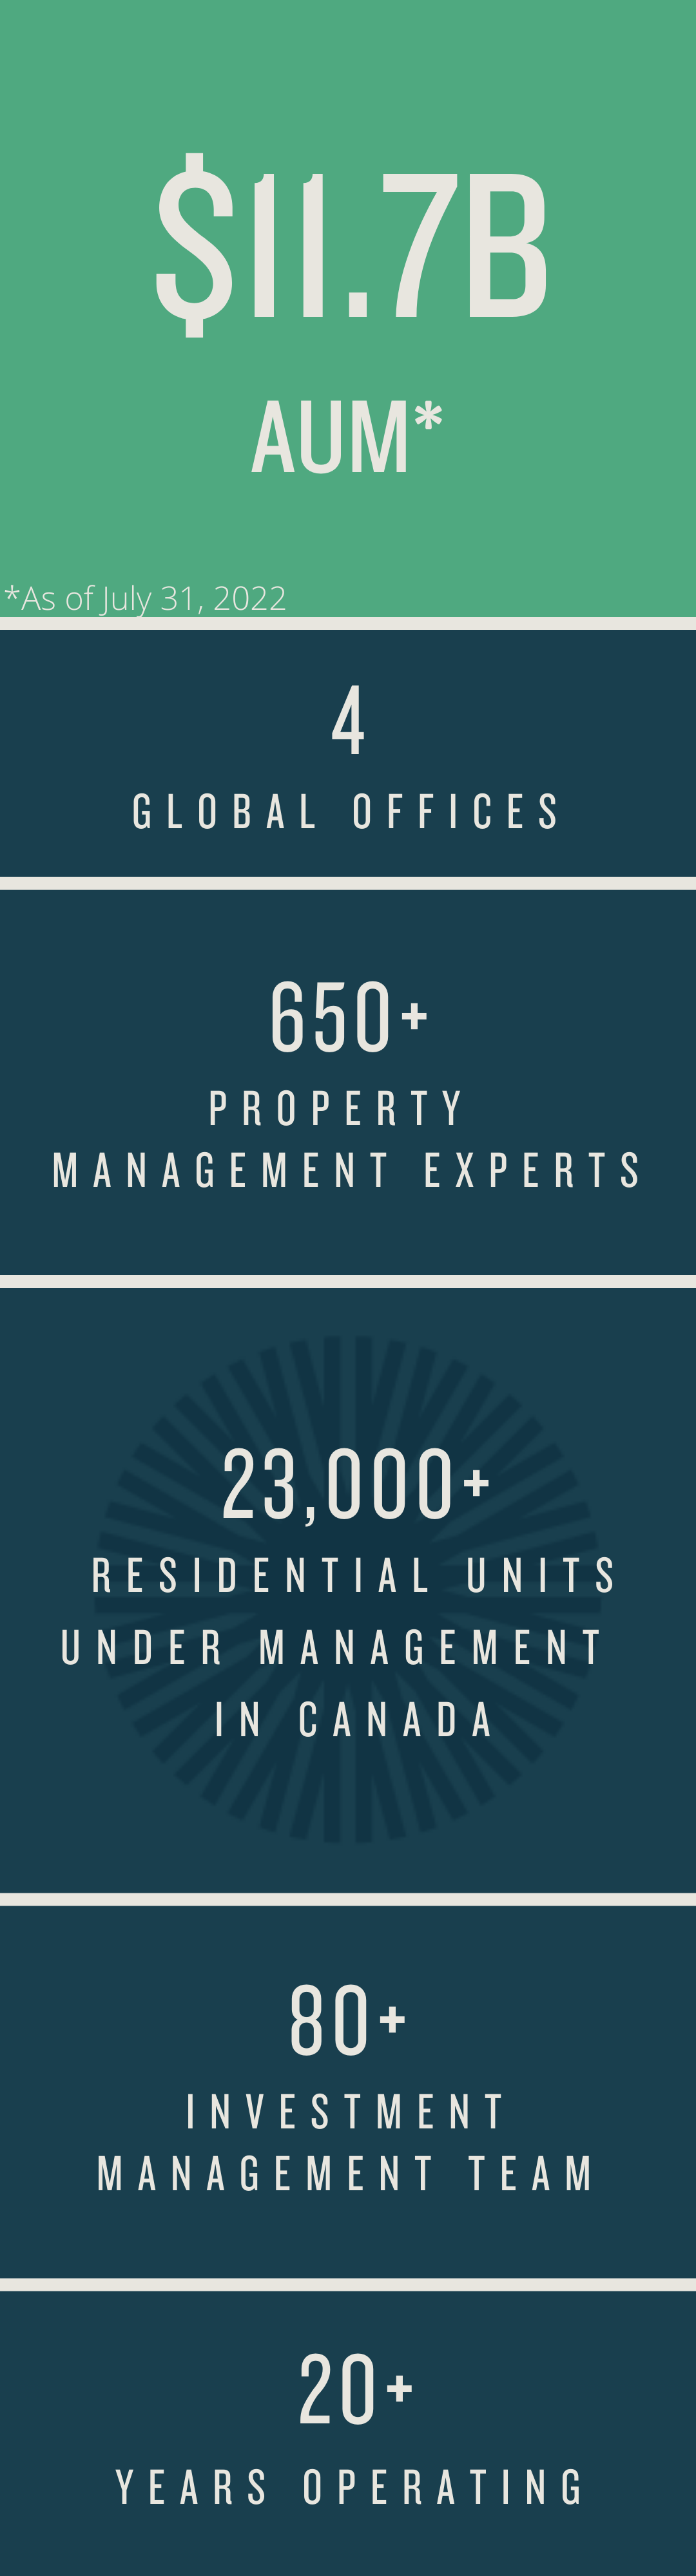 AUM 11.7Billion; 4 Global offices, 20+ year operating; Fully Integrated platform, 80+ investment management team; 650+ property management experts; 23,000+ residential units under management in Canada; as of June 30, 2022.